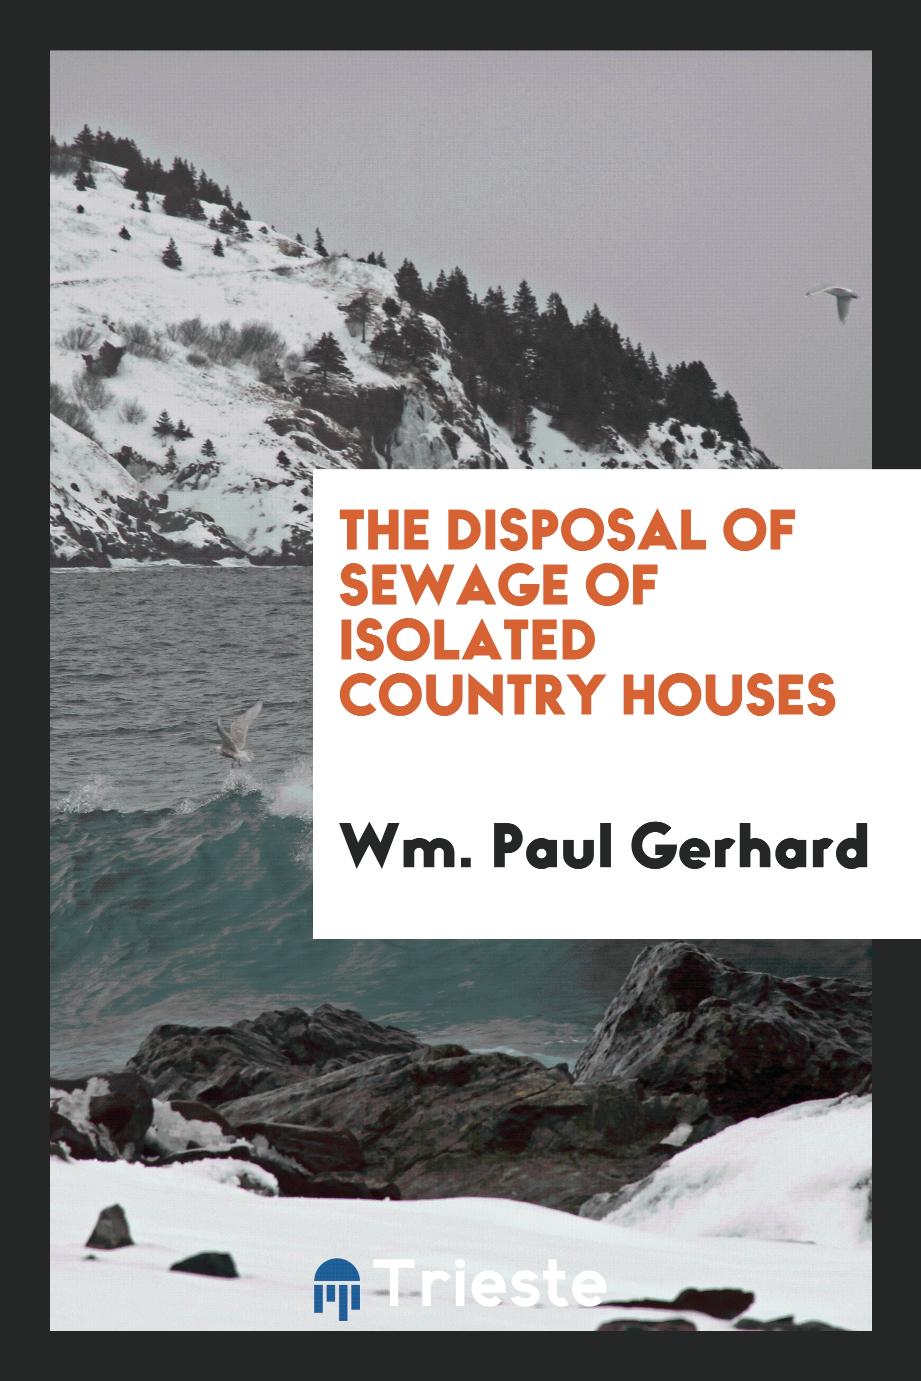 The disposal of sewage of isolated country houses